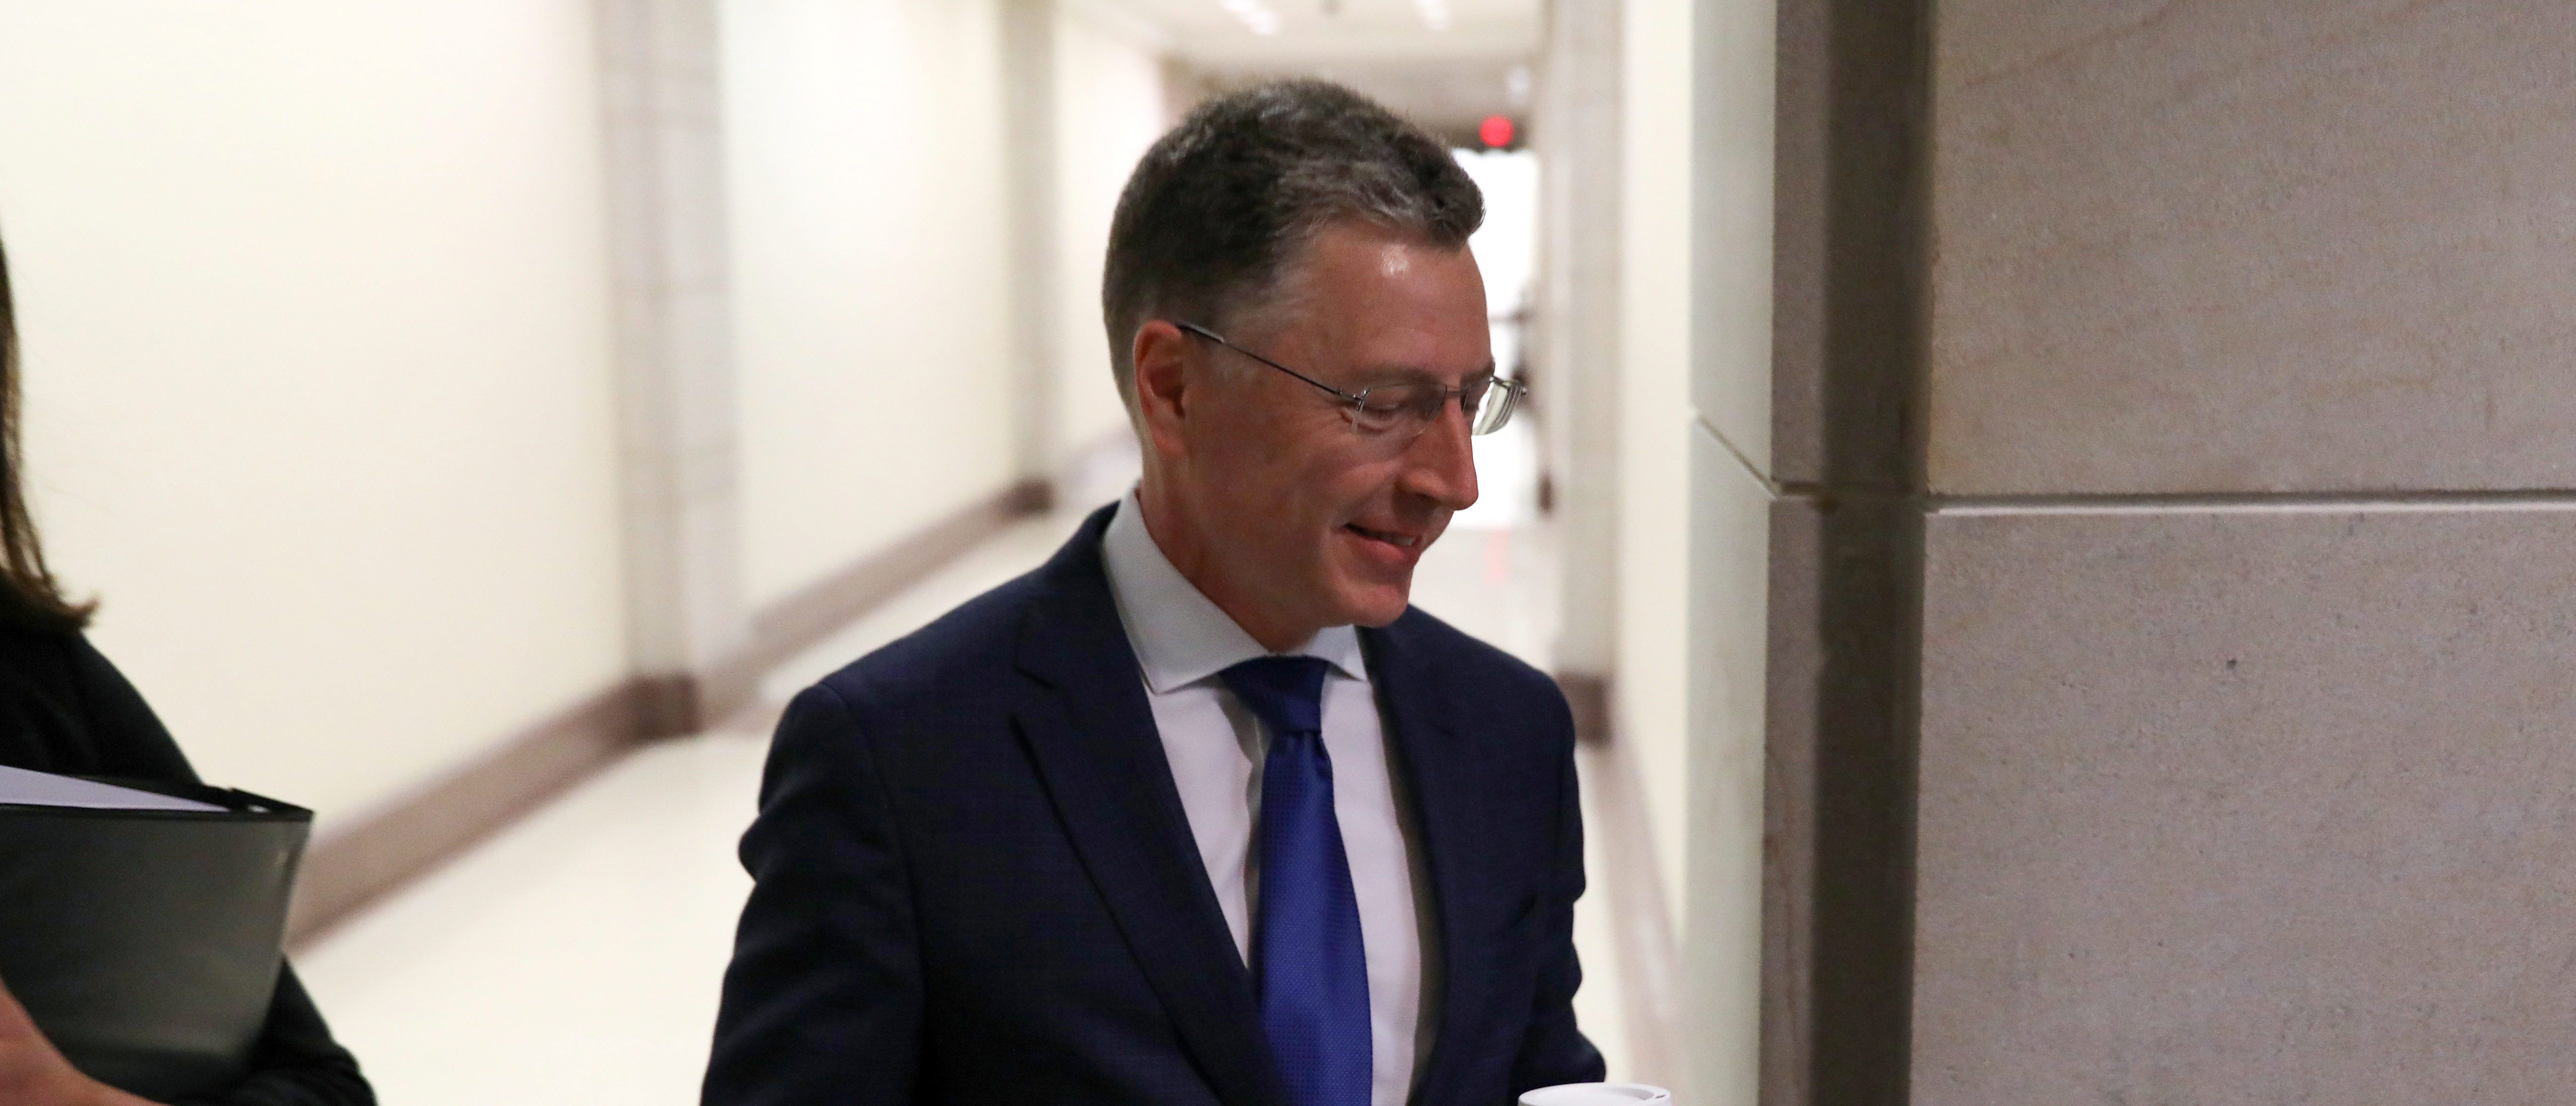 Kurt Volker, U.S. President Donald Trump's former envoy to Ukraine, arrives to be interviewed by staff for three House of Representatives committees as part of the impeachment inquiry into the president's dealings with Ukraine, at the U.S. Capitol in Washington, U.S. October 3, 2019. REUTERS/Jonathan Ernst